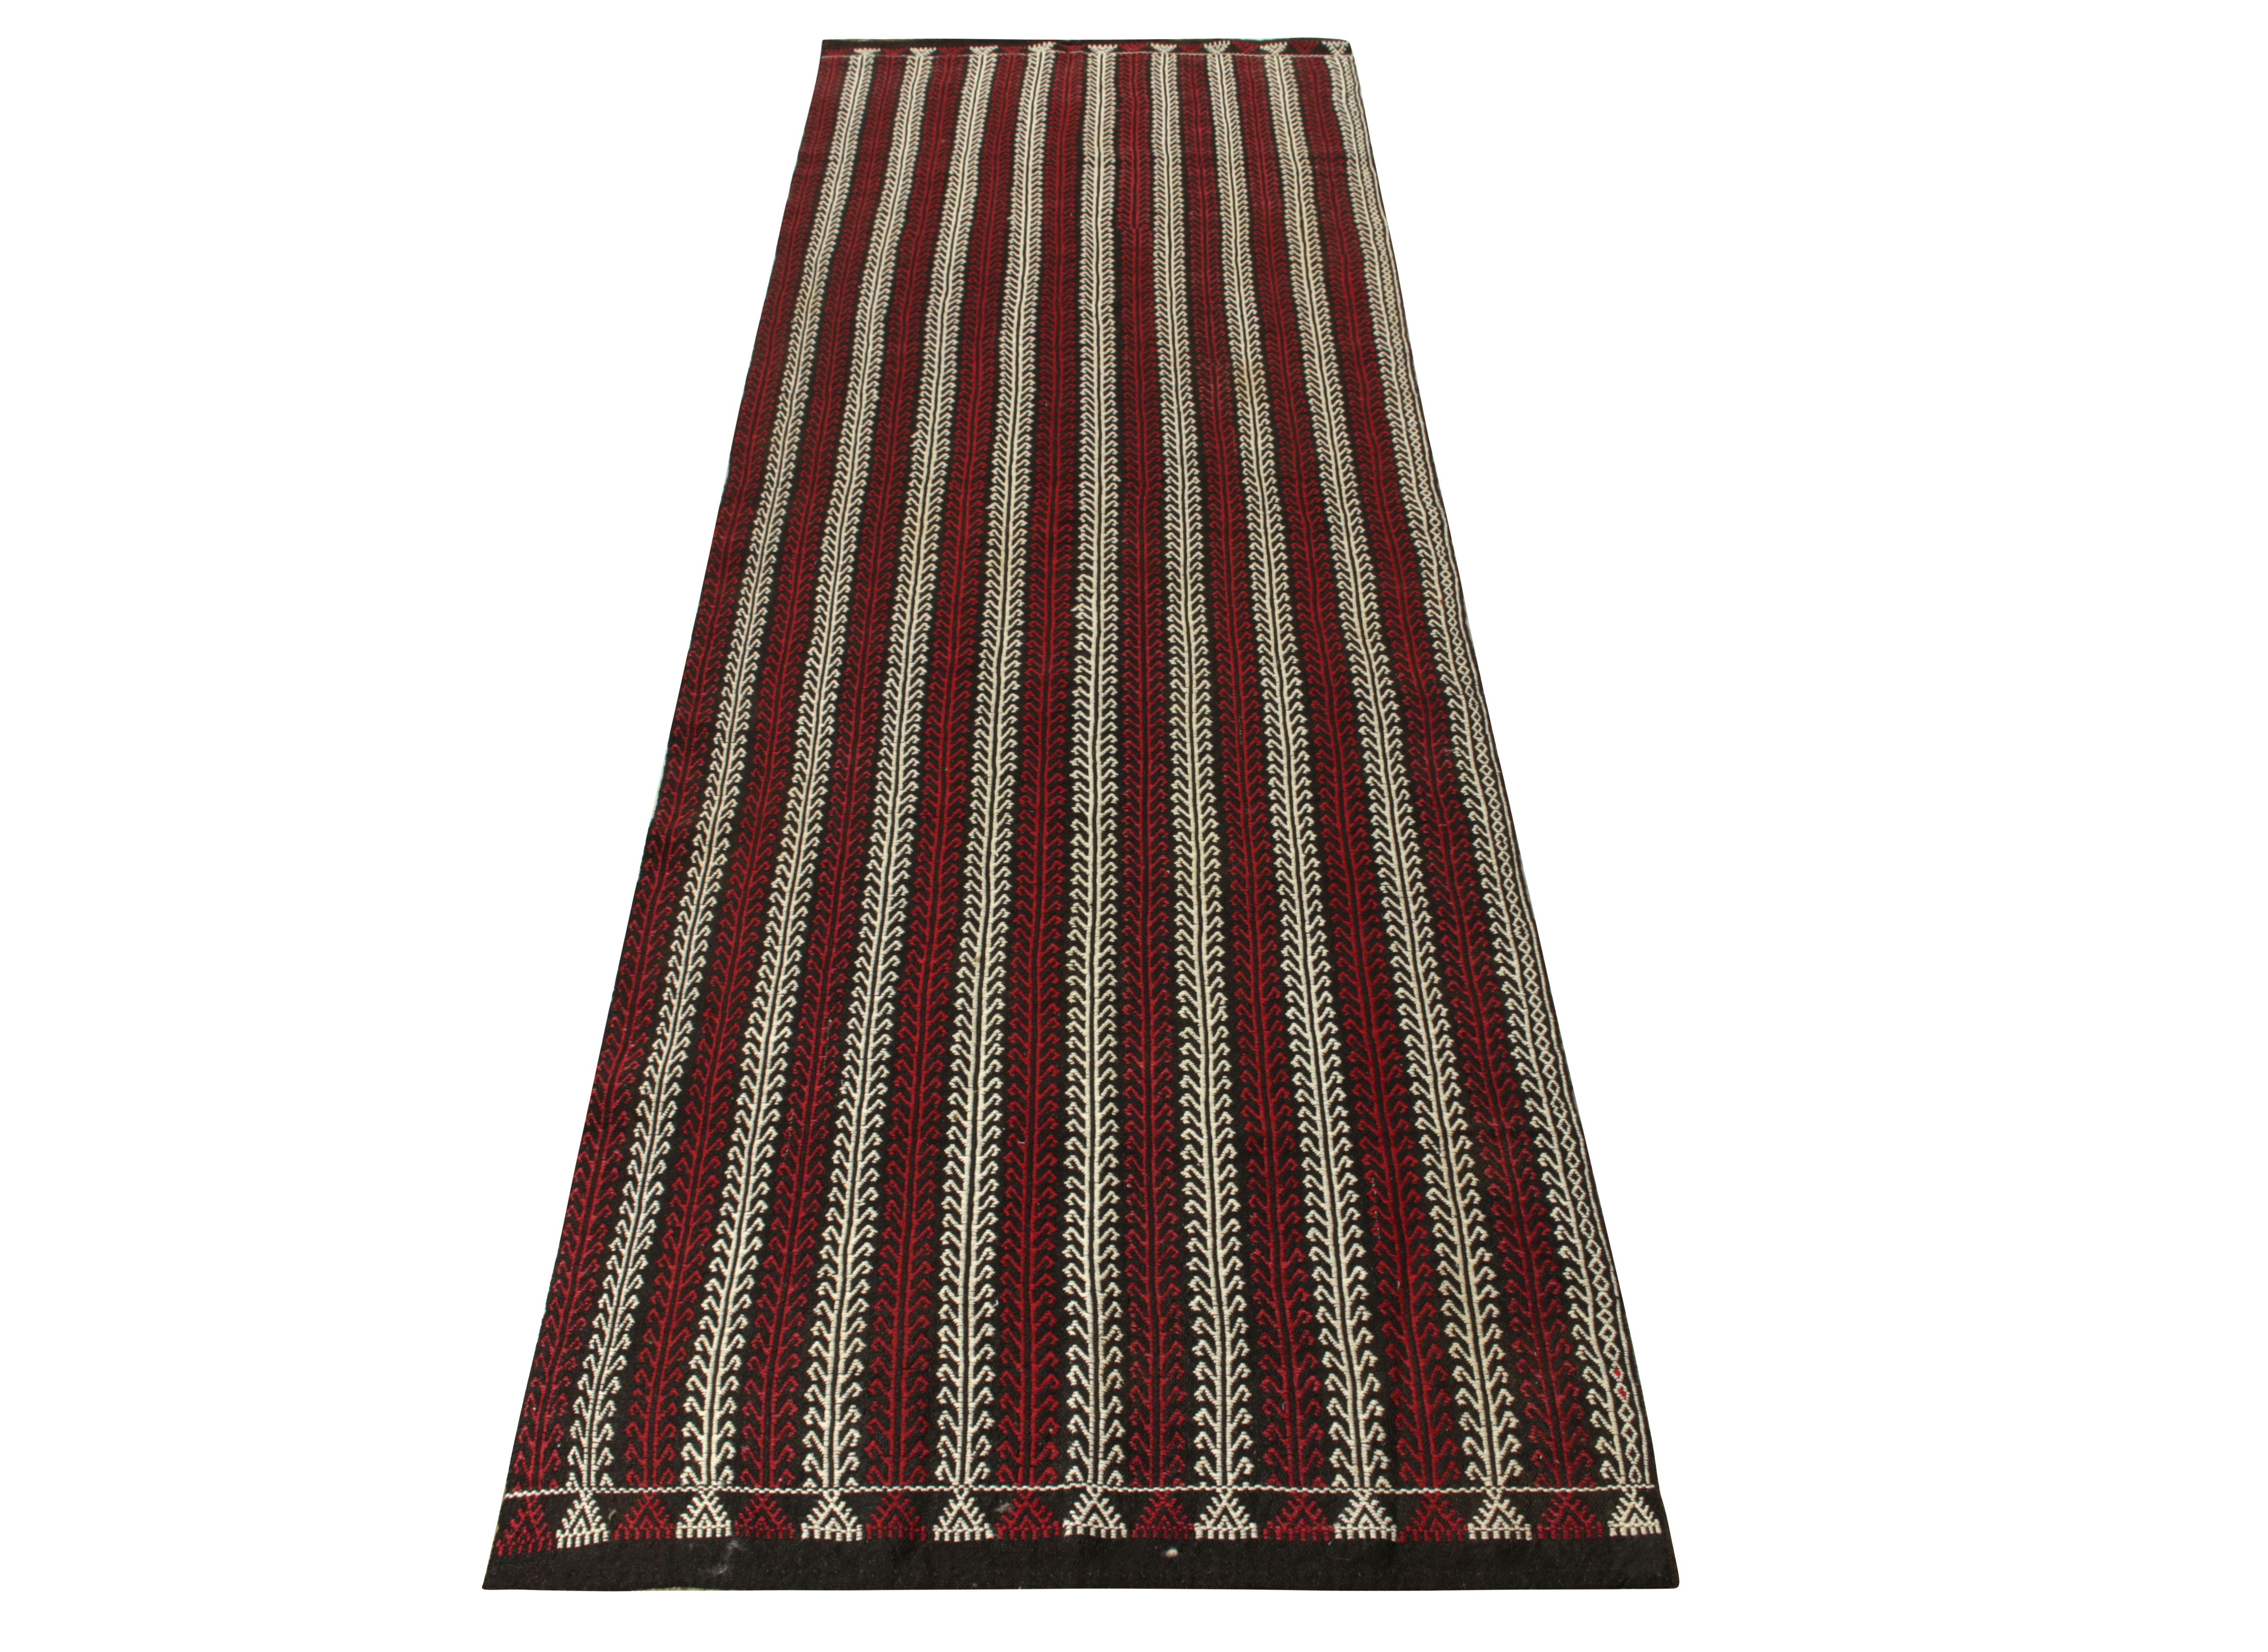 Hailing from Turkey circa 1920-1930, a mature vintage kilim runner enjoying a symmetric geometric pattern branching symmetrically for a strong sense of movement—highlighted with rich red and white on a charcoal black scale. Enigmatic yet elegant, a